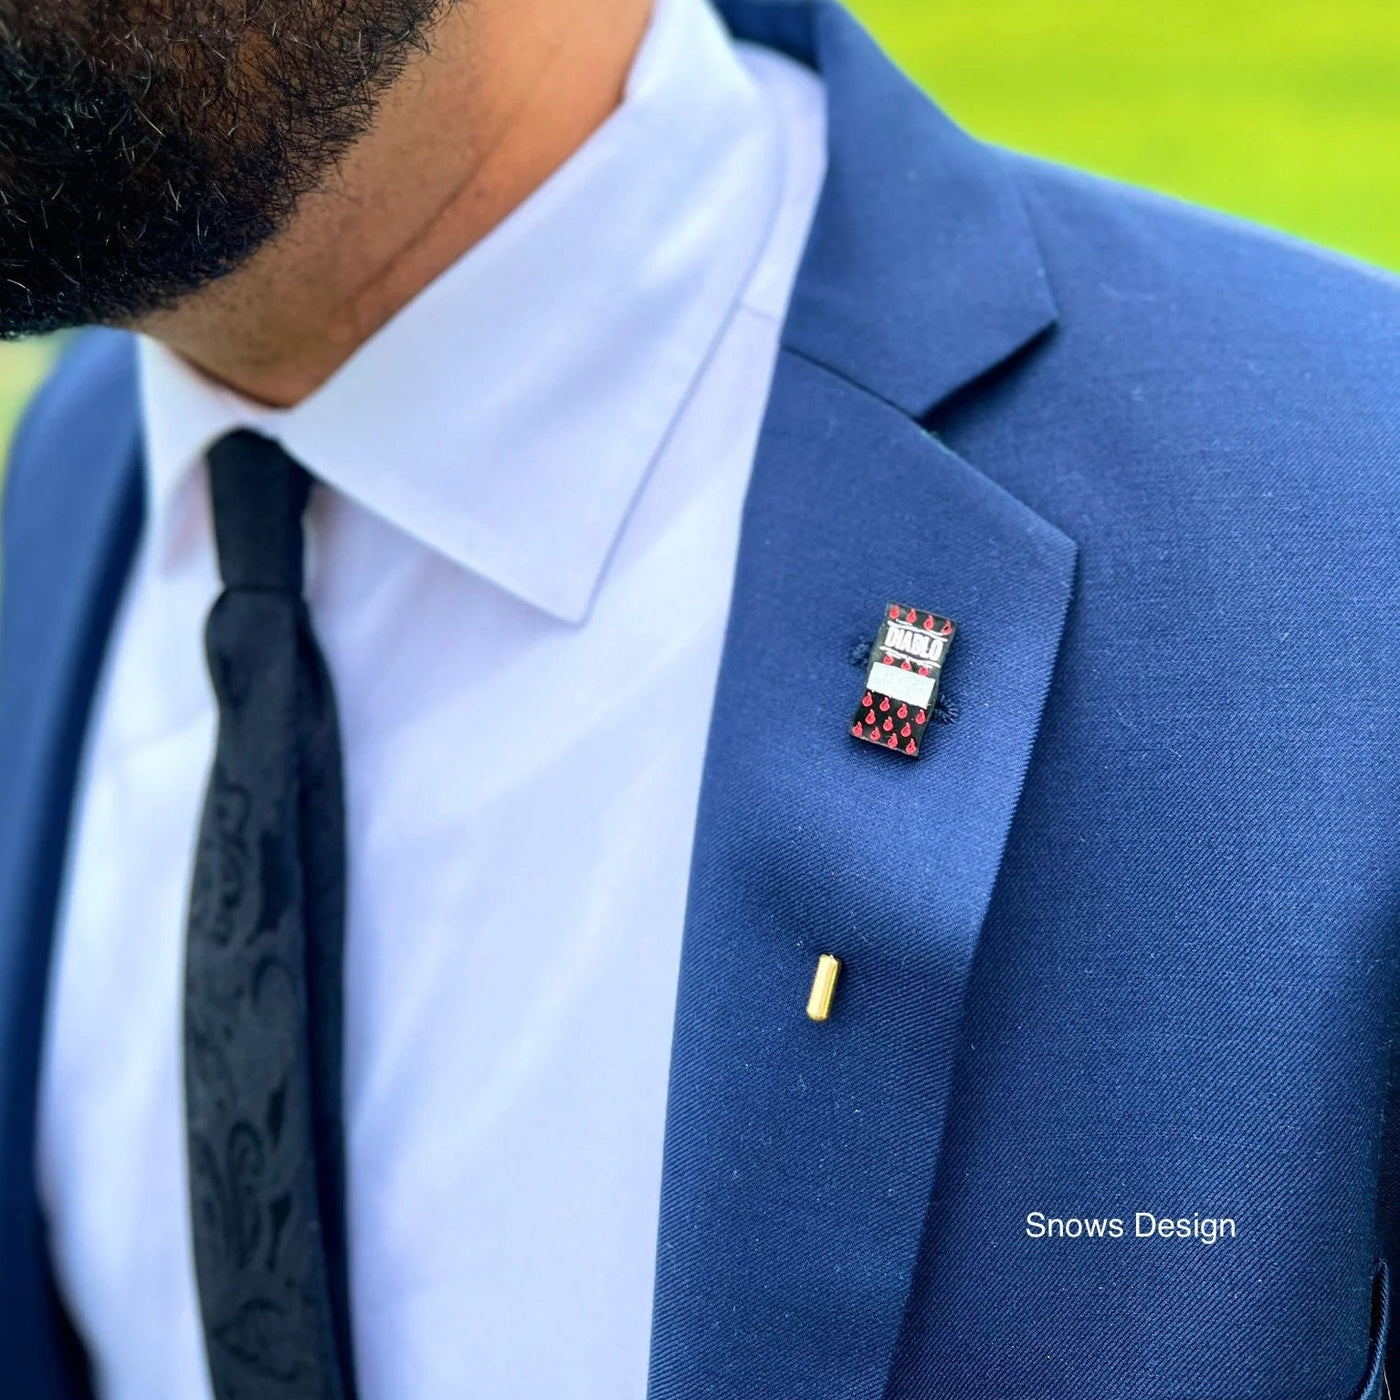 Lapel Pin by Snows Design